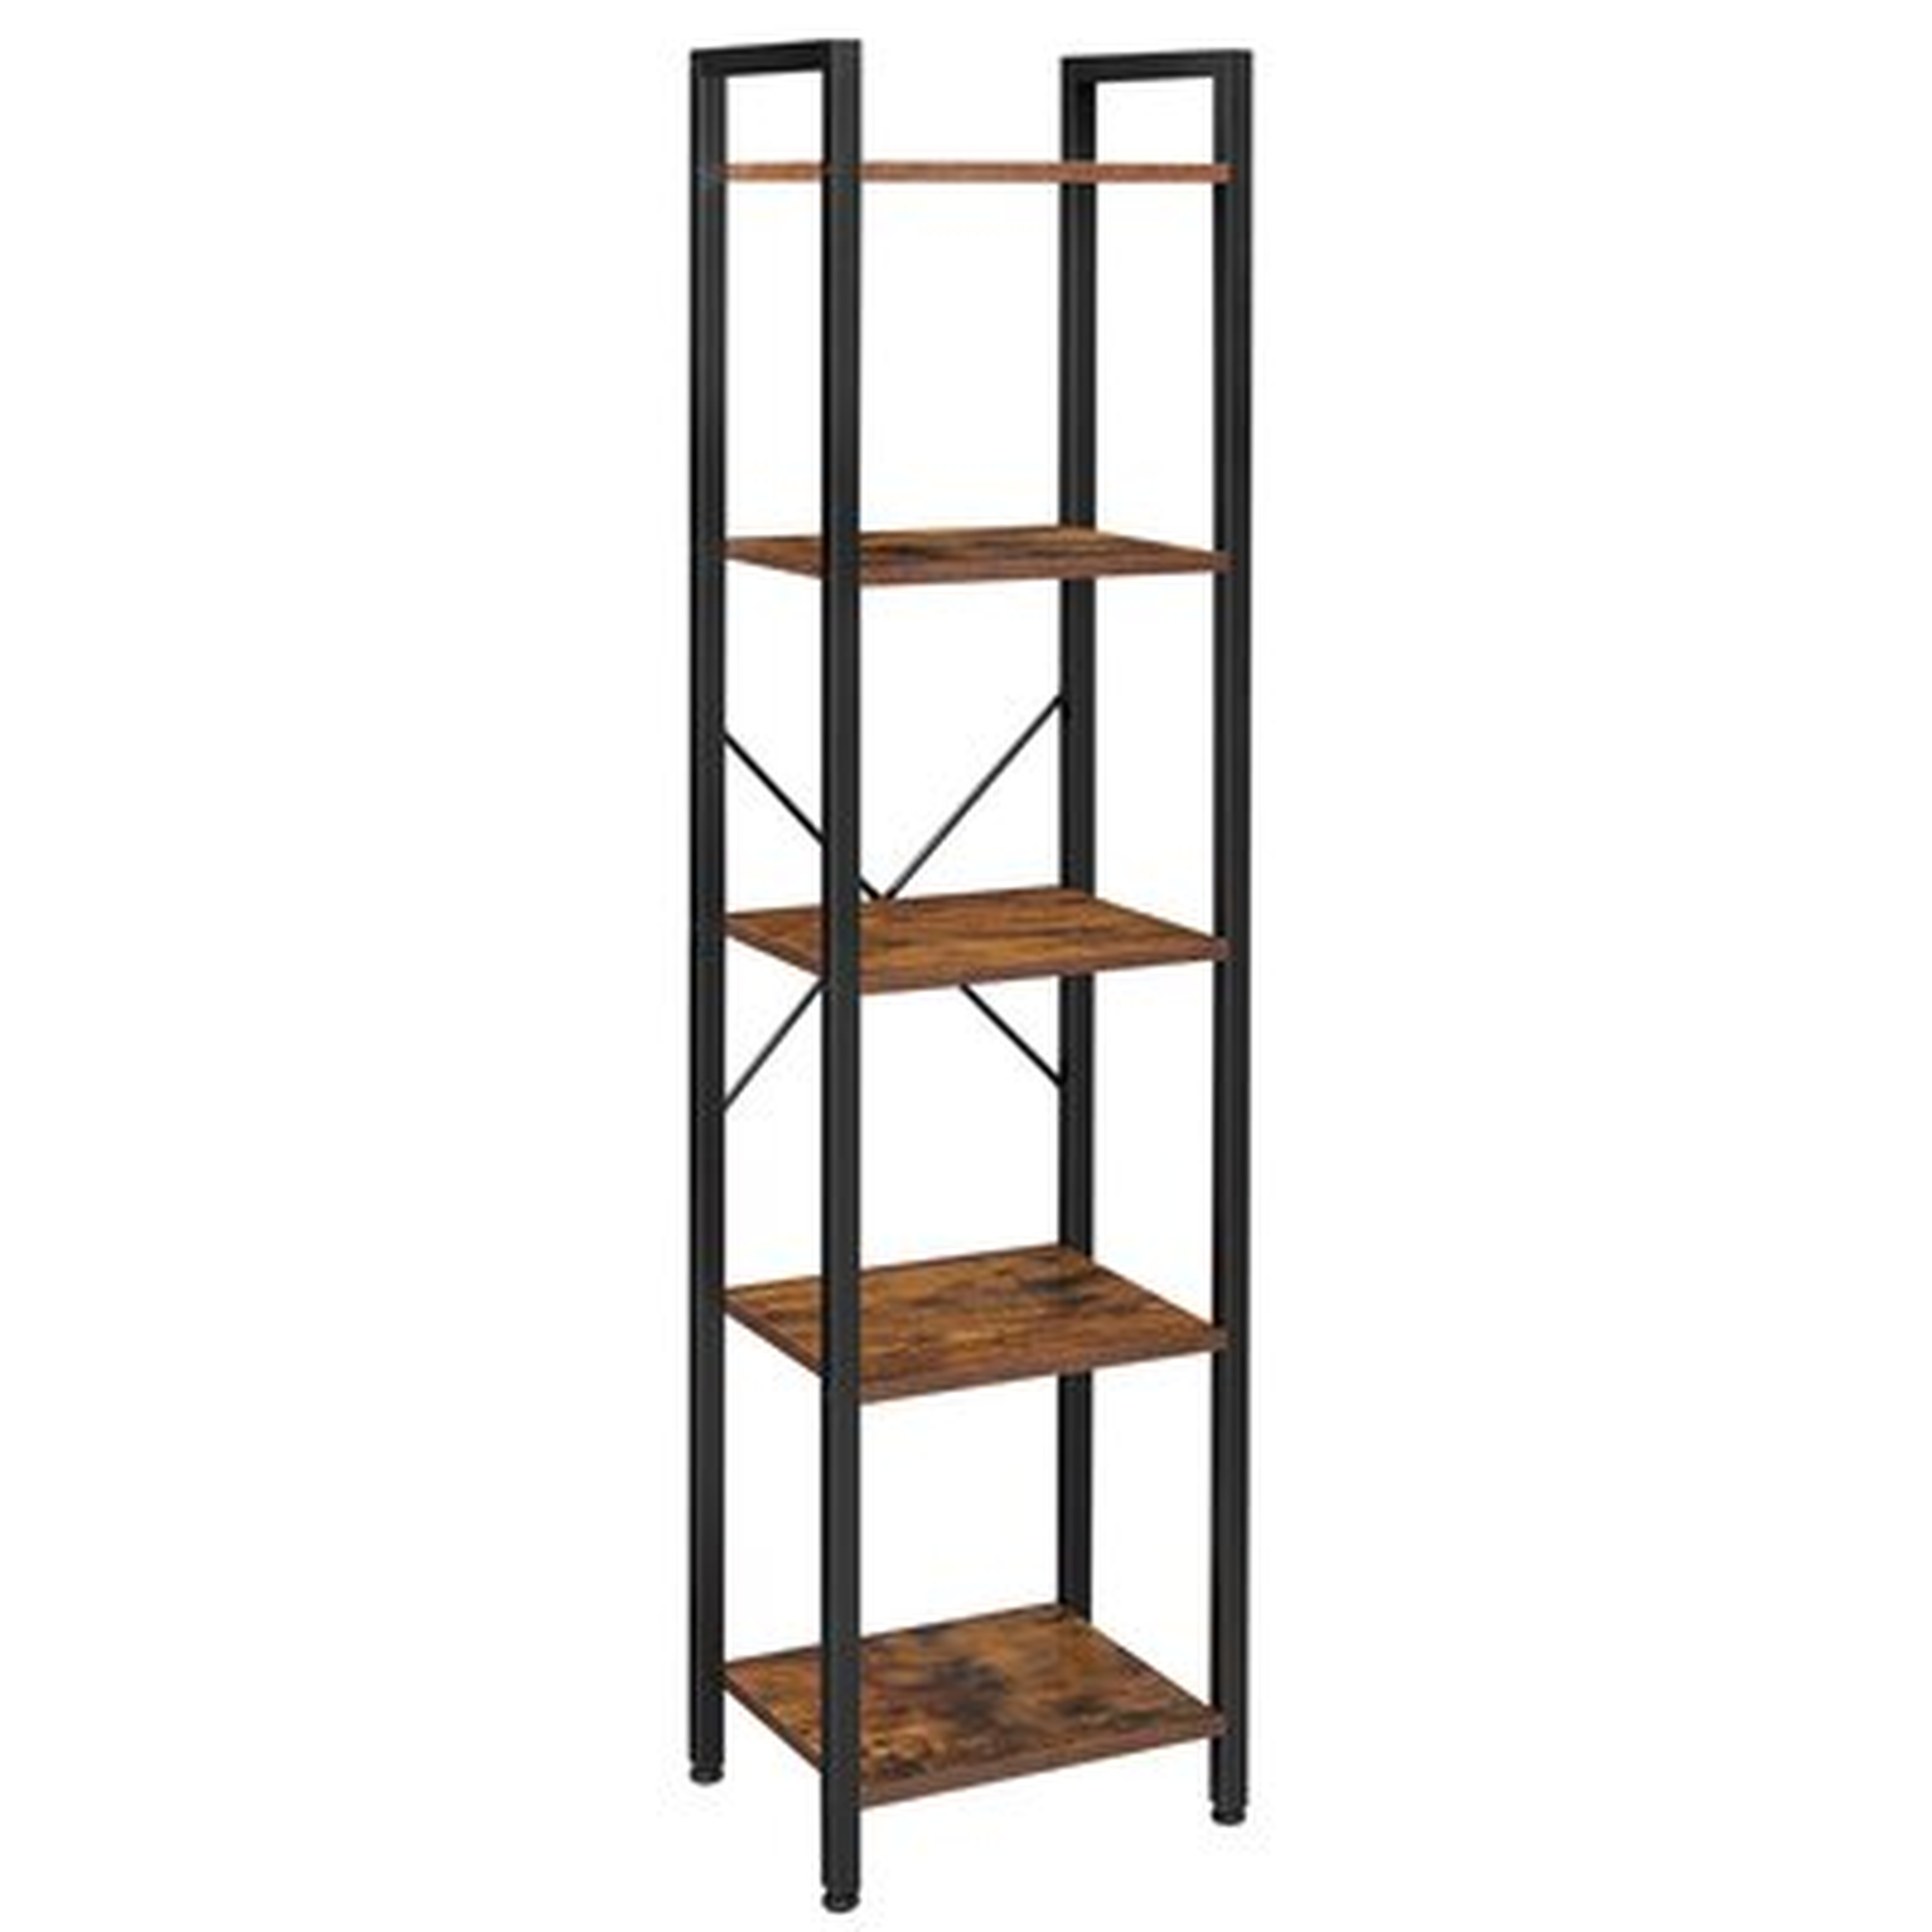 17 Stories 5-Tier Bookshelf, Bookcase, Storage Shelving Unit With 5 Shelves, For Study, Living Room, Bedroom, 15.7 X 11.8X 57.5 Inches, Industrial, Rustic Brown And Black - Wayfair